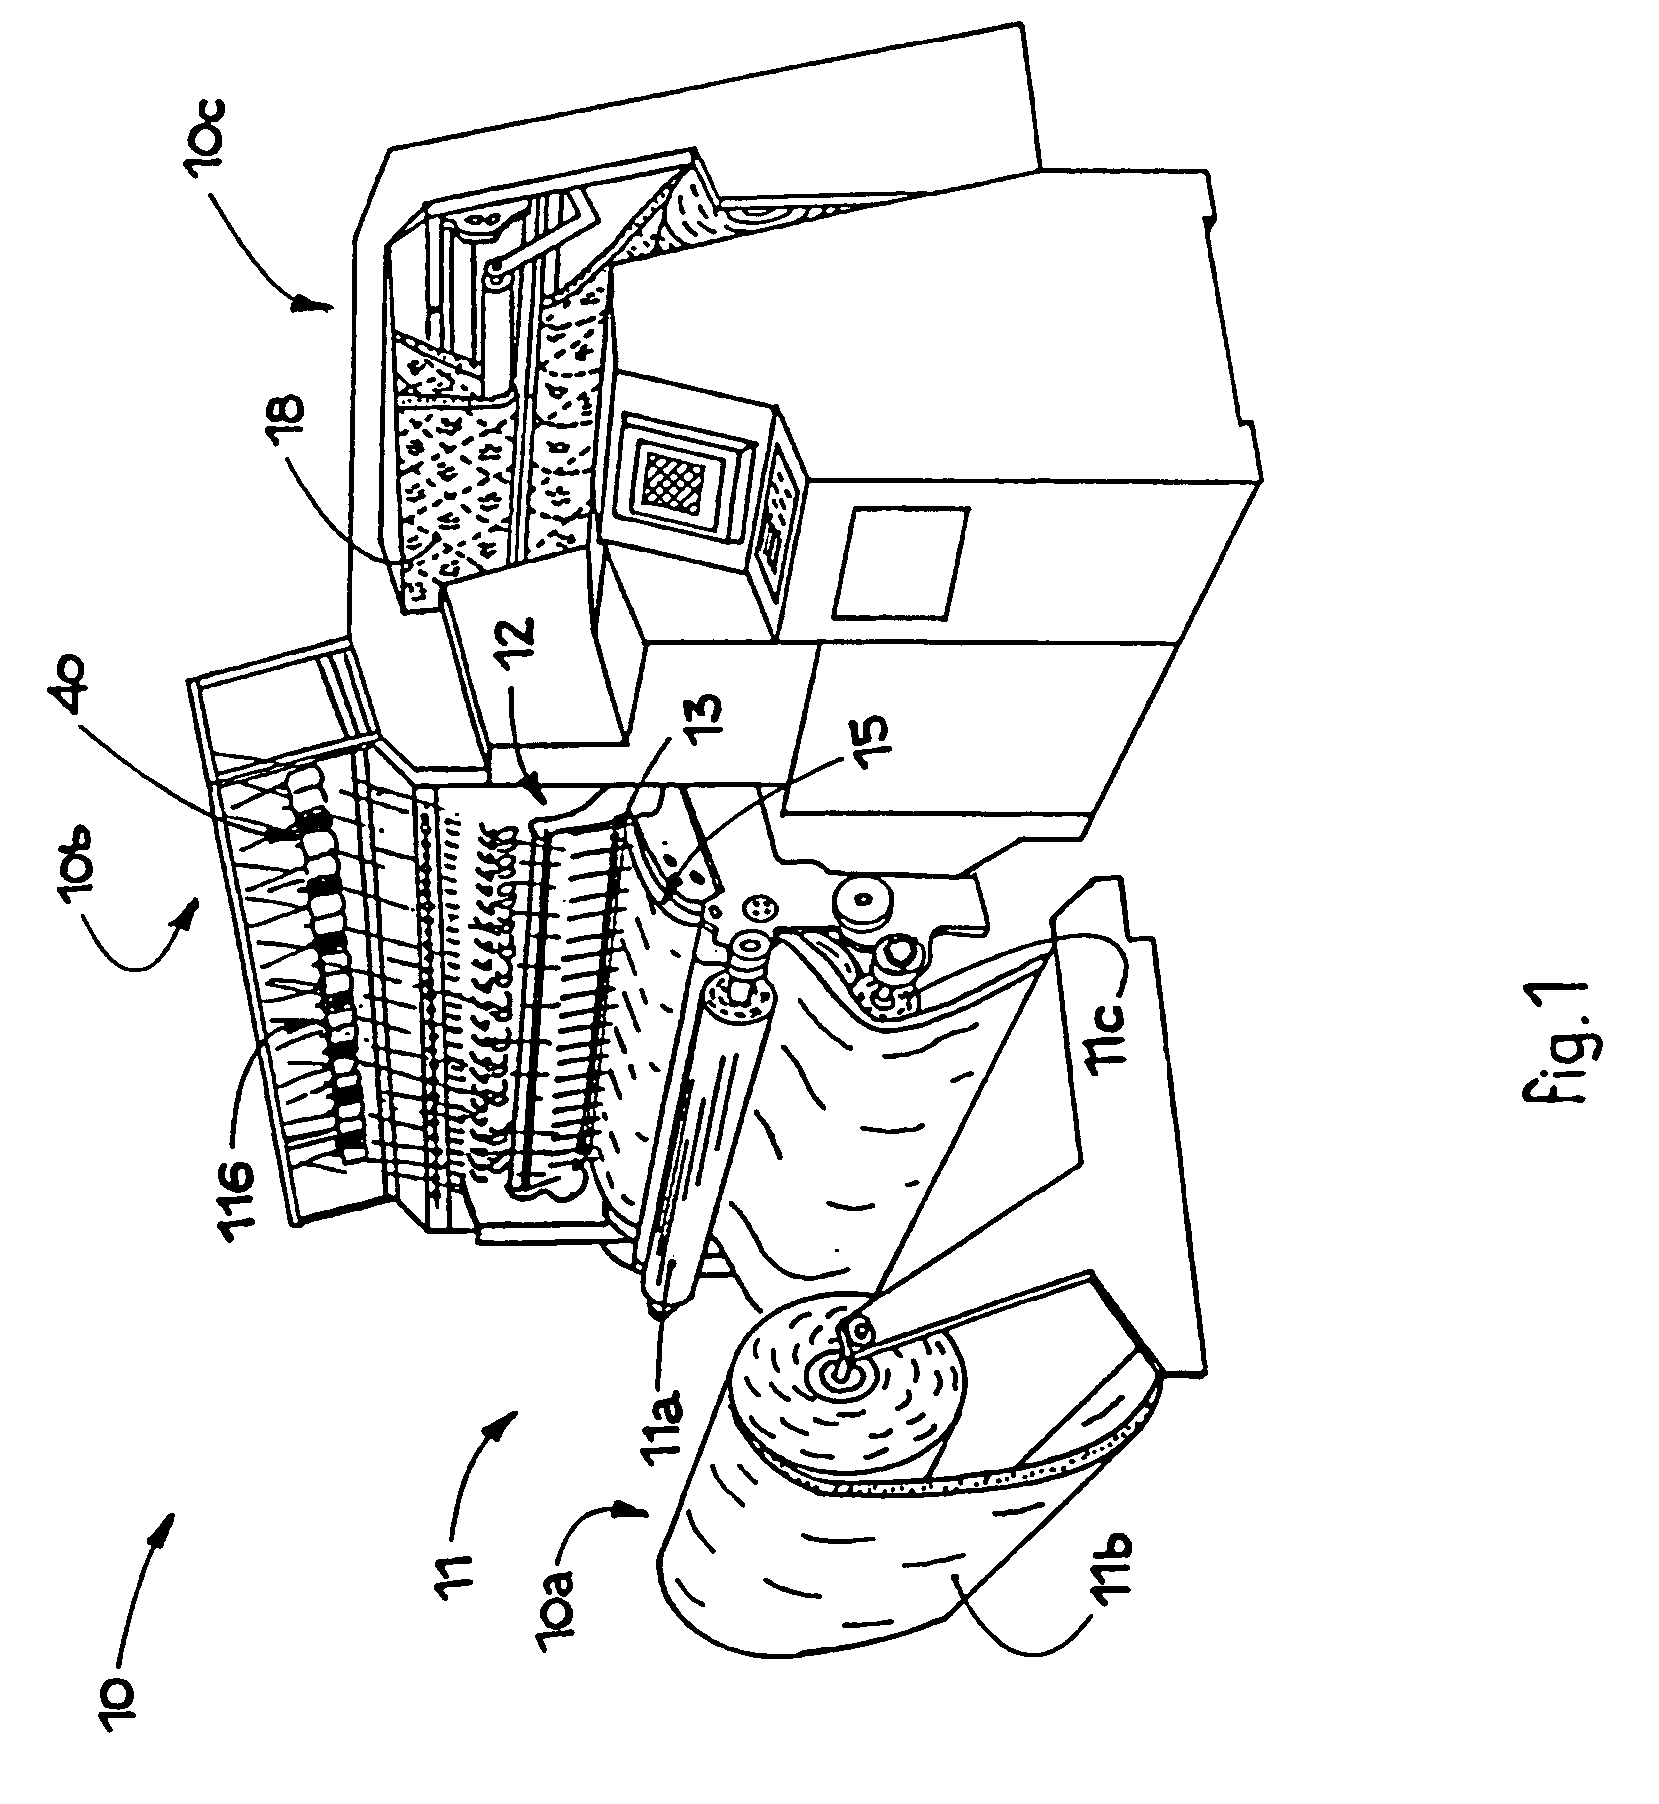 Method and device to apply cord thread or ribbons onto fabrics in a quilting machine